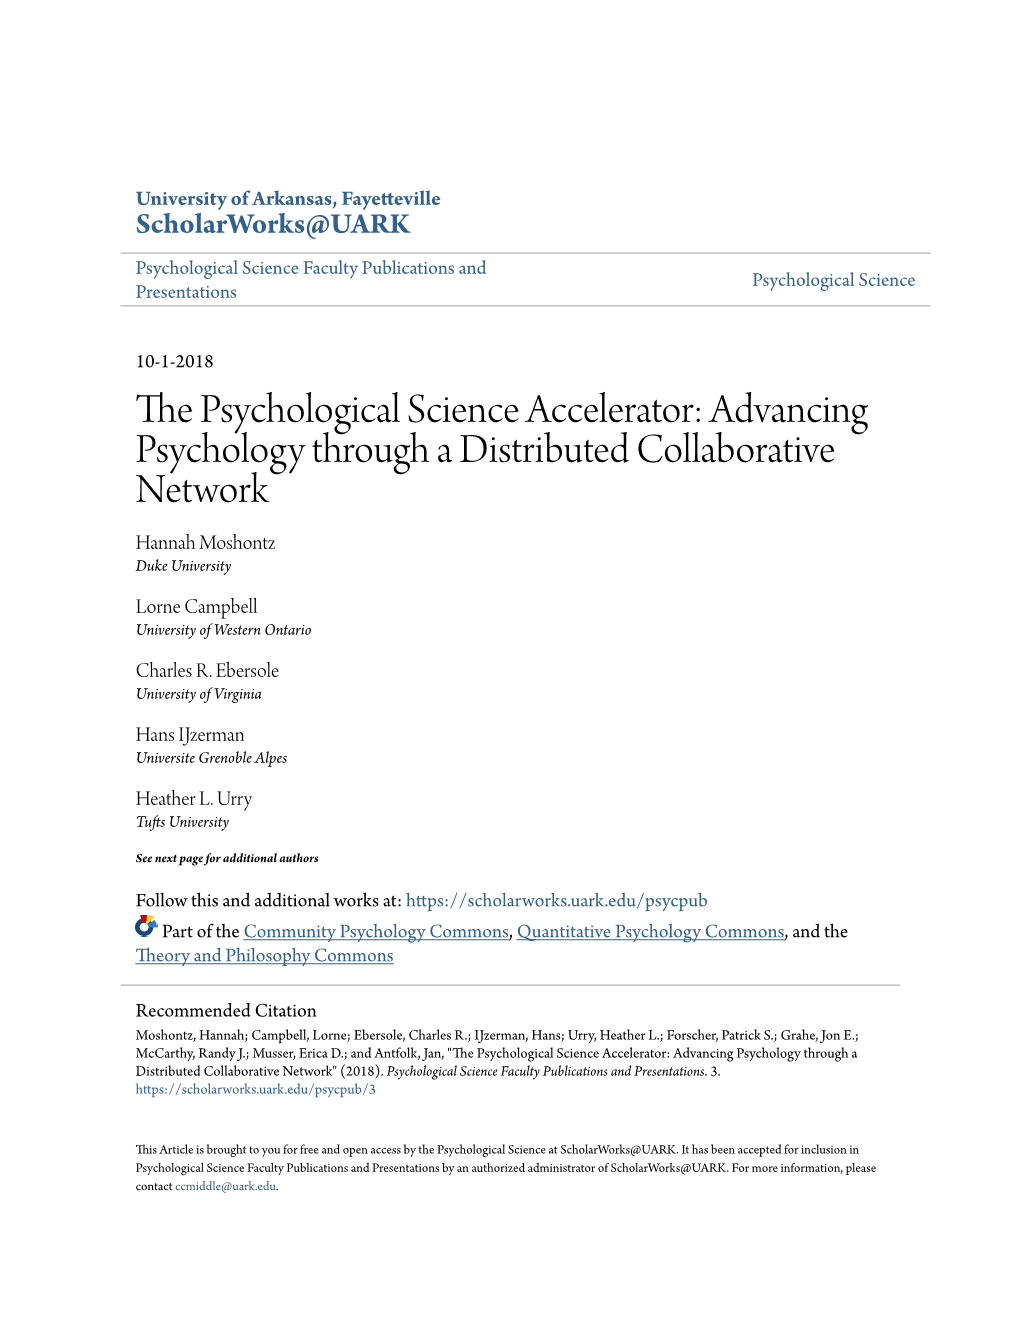 The Psychological Science Accelerator 1